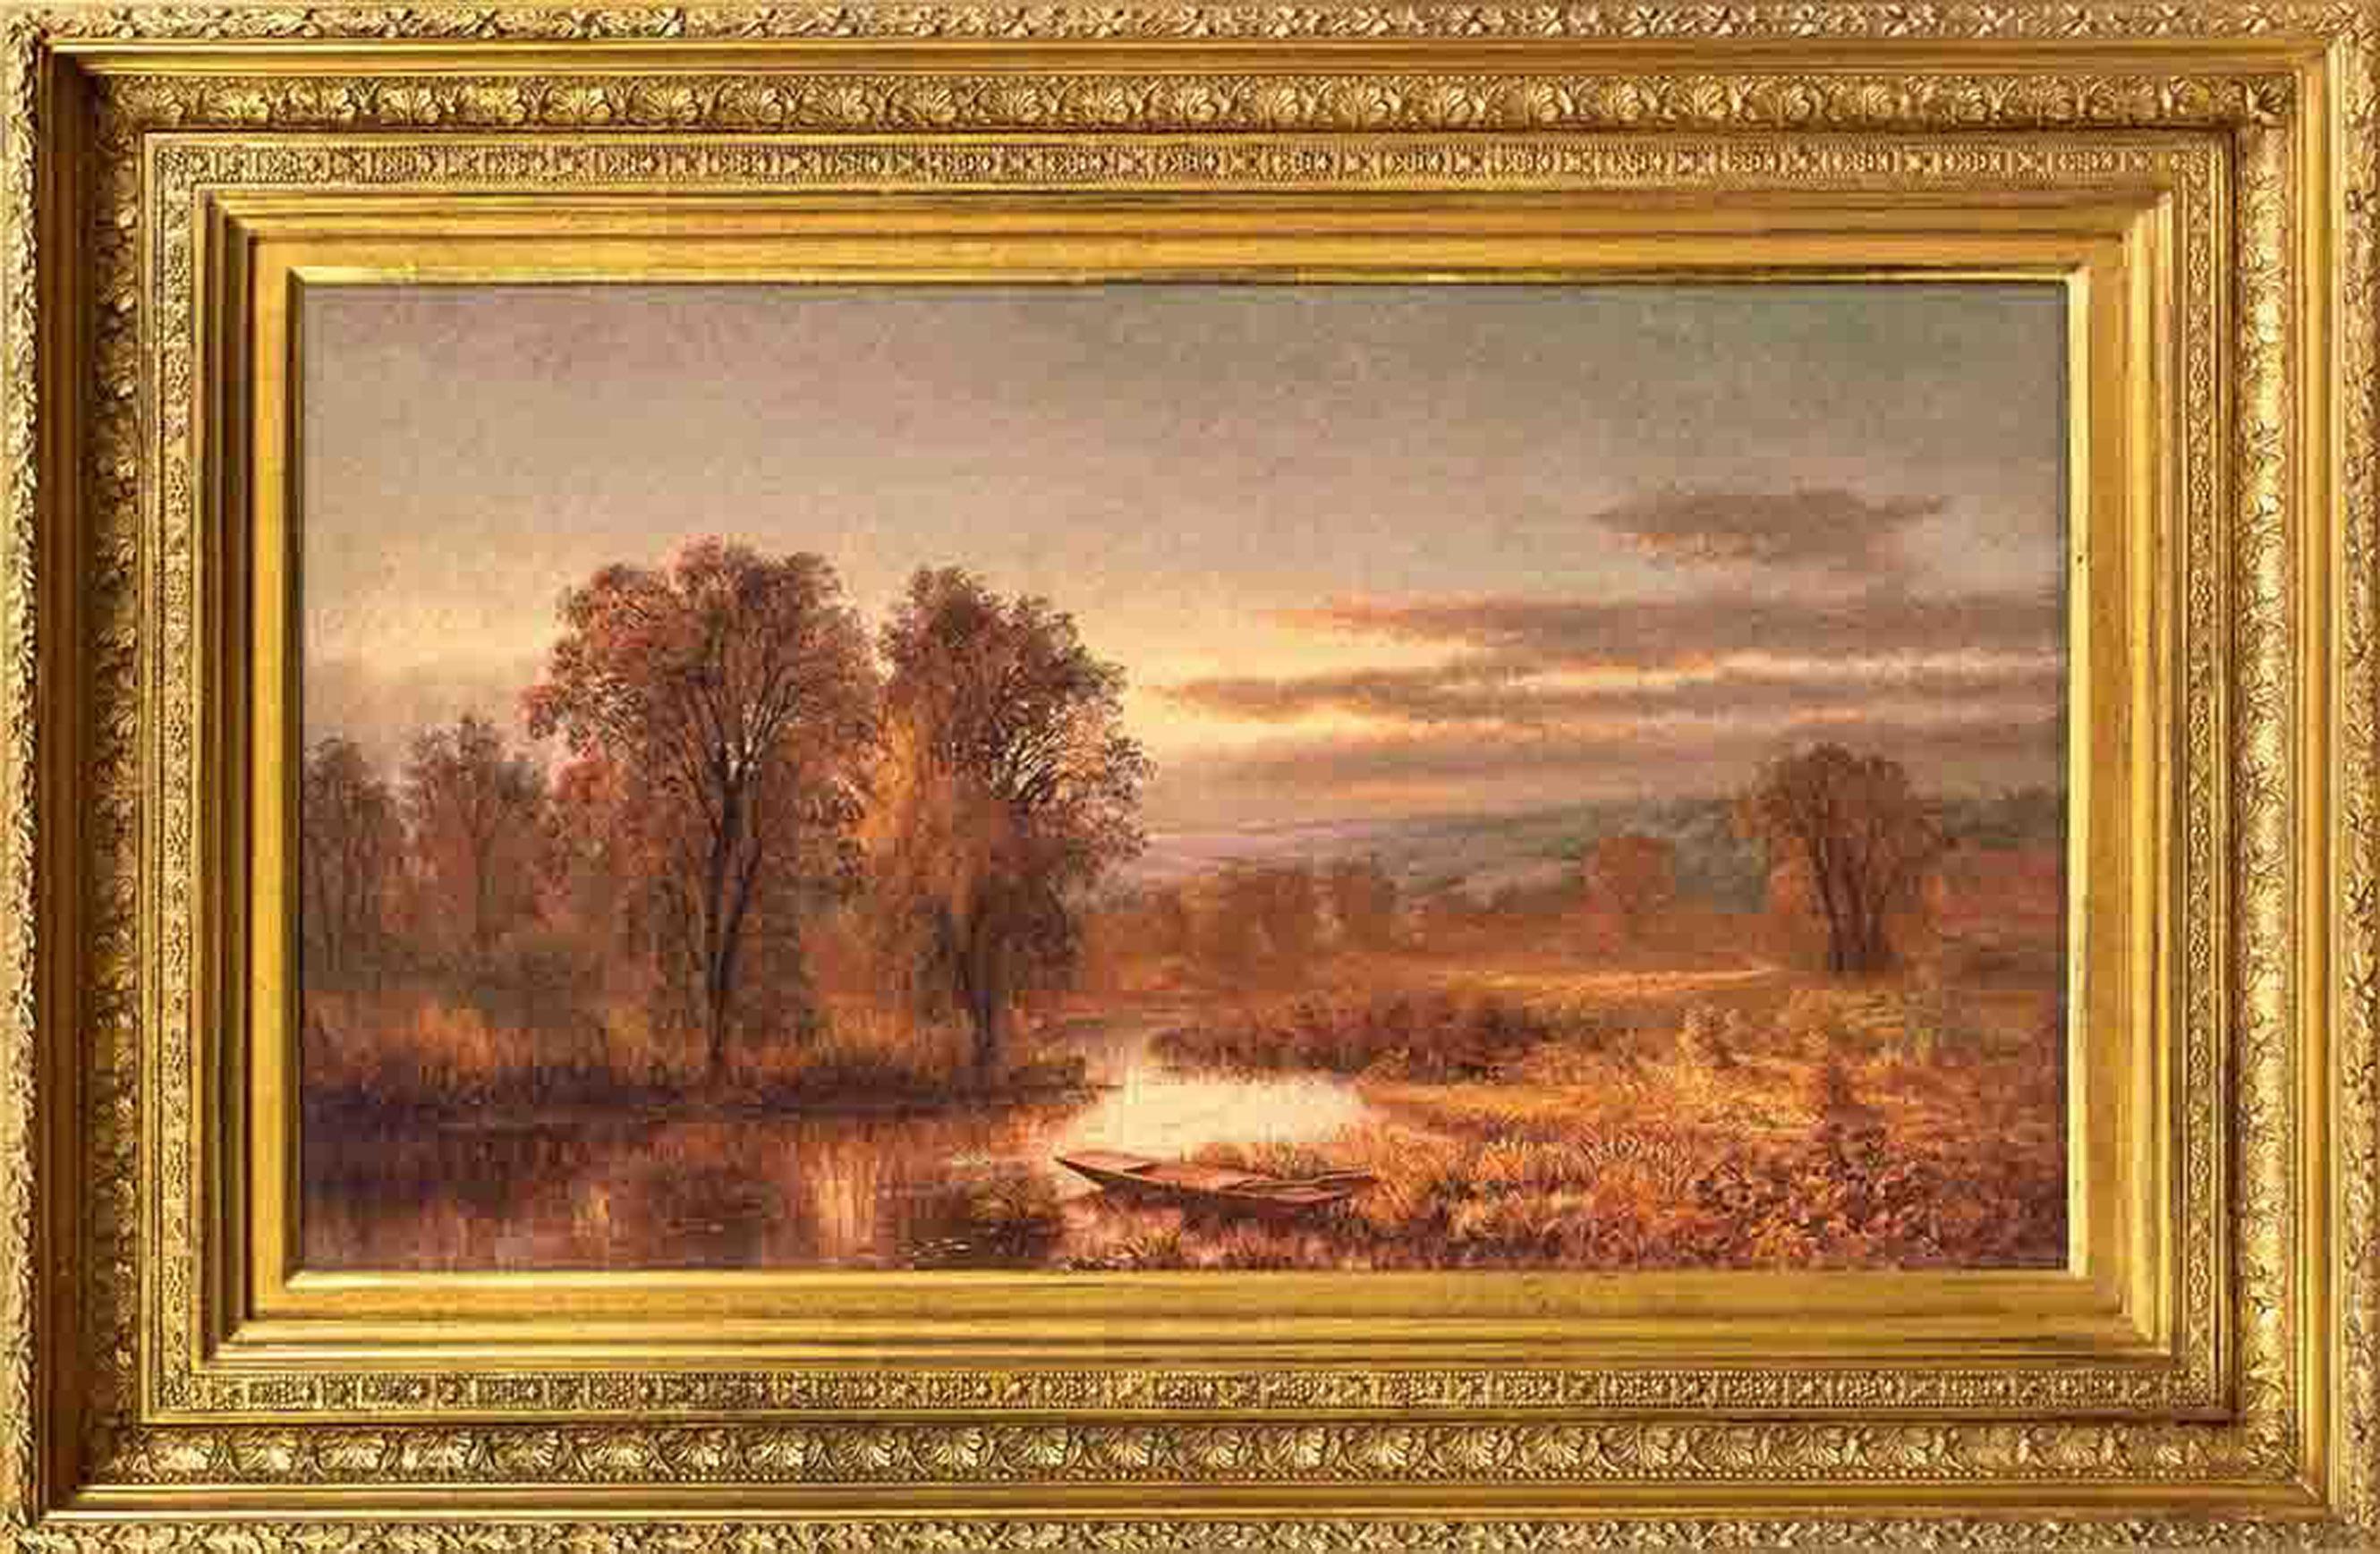 Autumn River with Punt in the Reeds by M.J. Walters (American, 1837-1883)